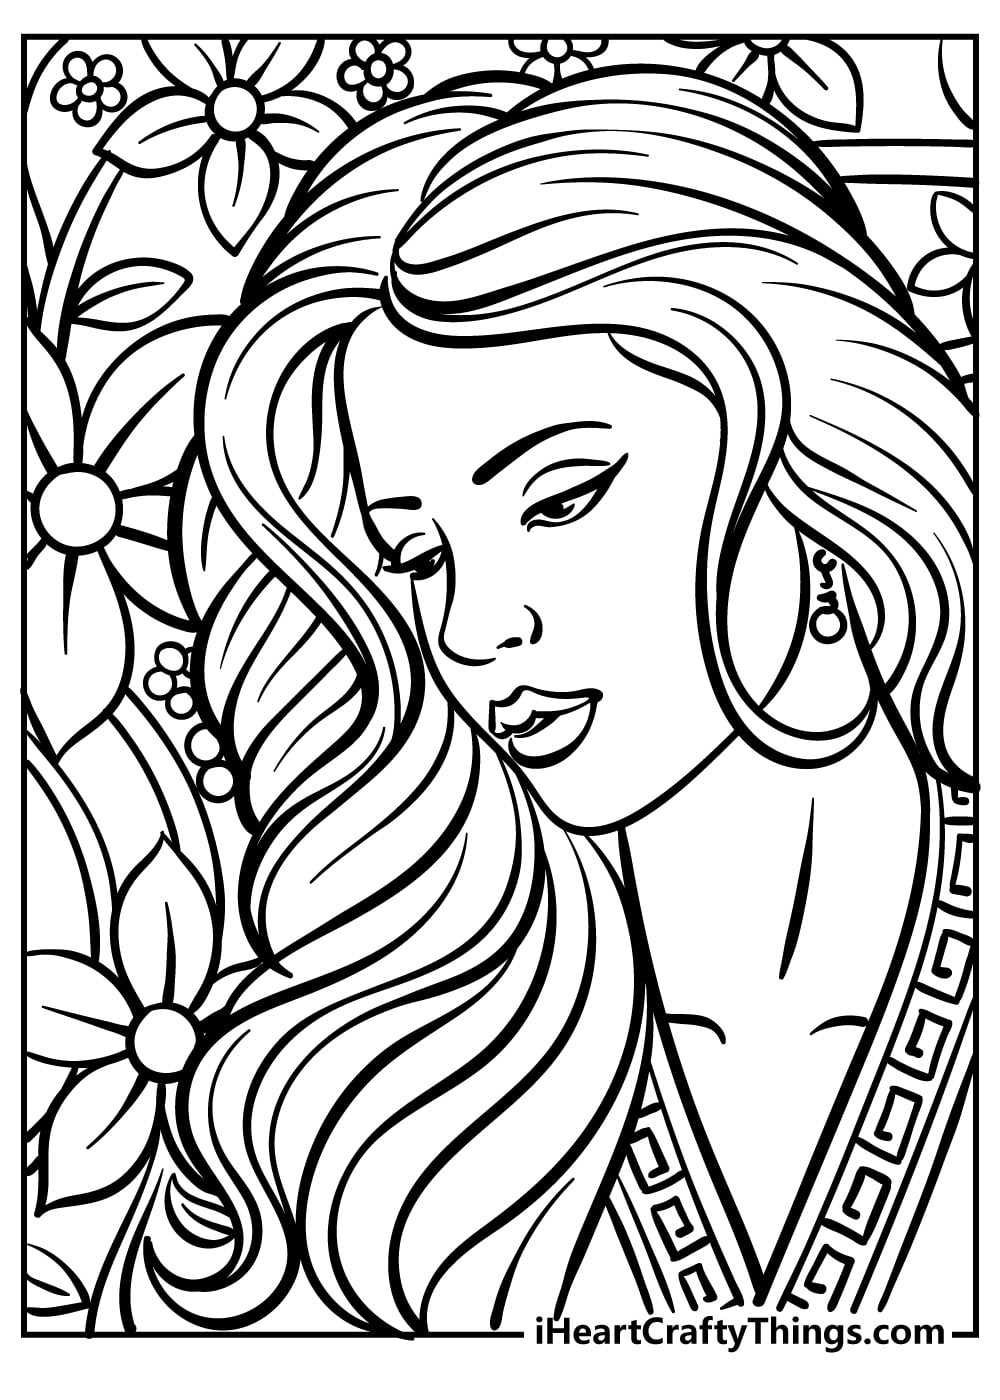 Printable Adult Coloring Pages Updated 2022 